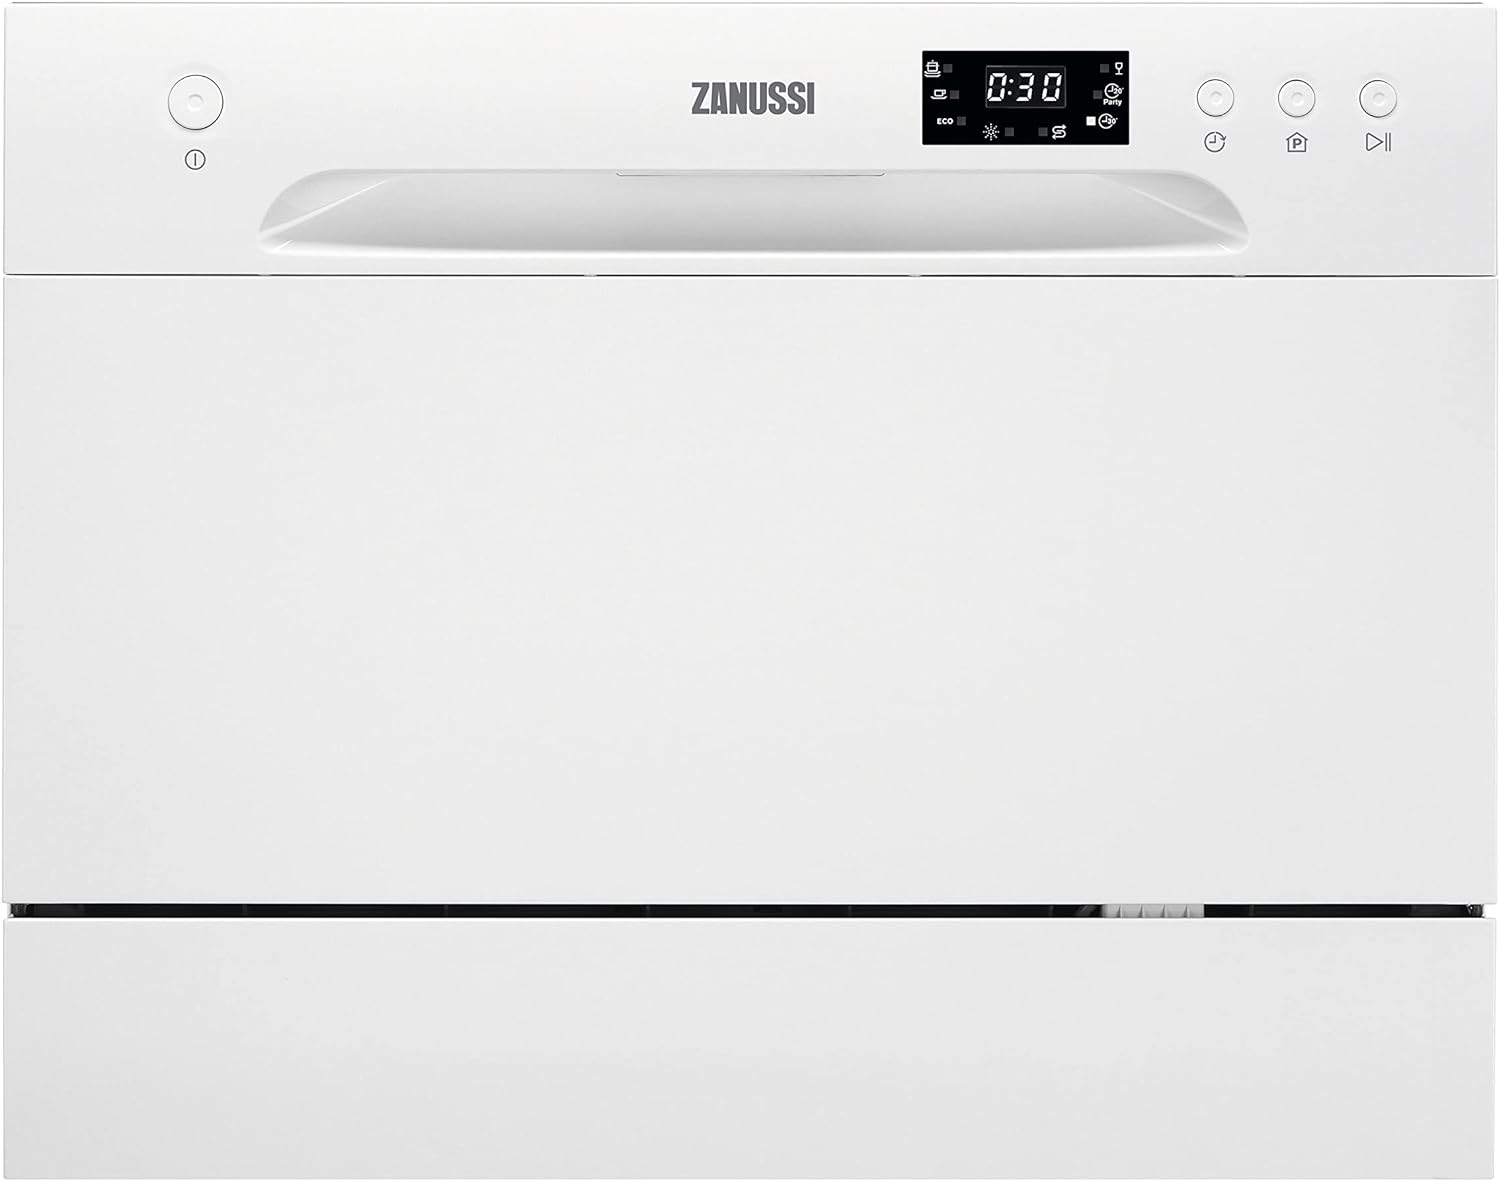 Zanussi ZDM17301WA Freestanding Counter Top Dishwasher, Compact Dishwasher, 55 cm Width, 6 Place Settings, 6 Programmes, Residual Drying, 52dB, White [Energy Class F] - Amazing Gadgets Outlet